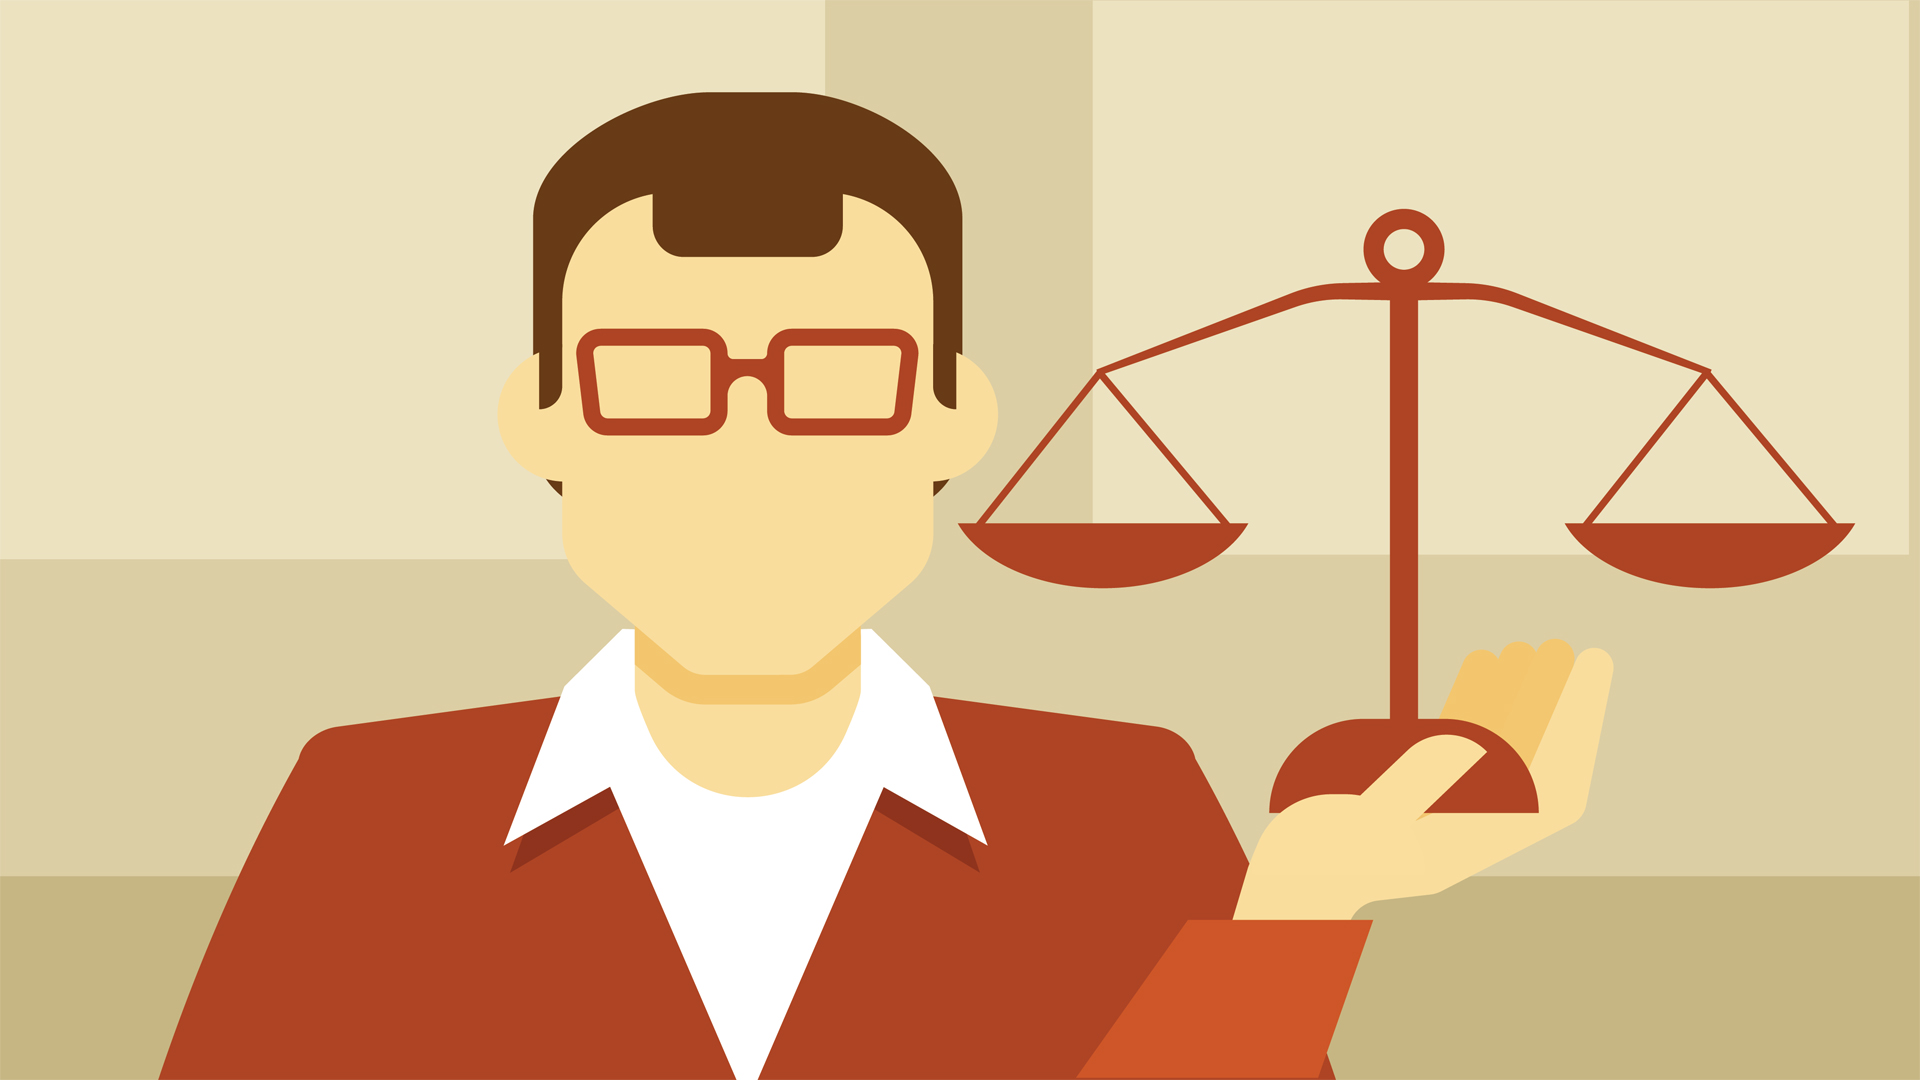 Simplified illustration of a male figure, possibly a lawyer or judge, with a balanced scale in hand, symbolizing justice, legal balance, or fair decision-making.